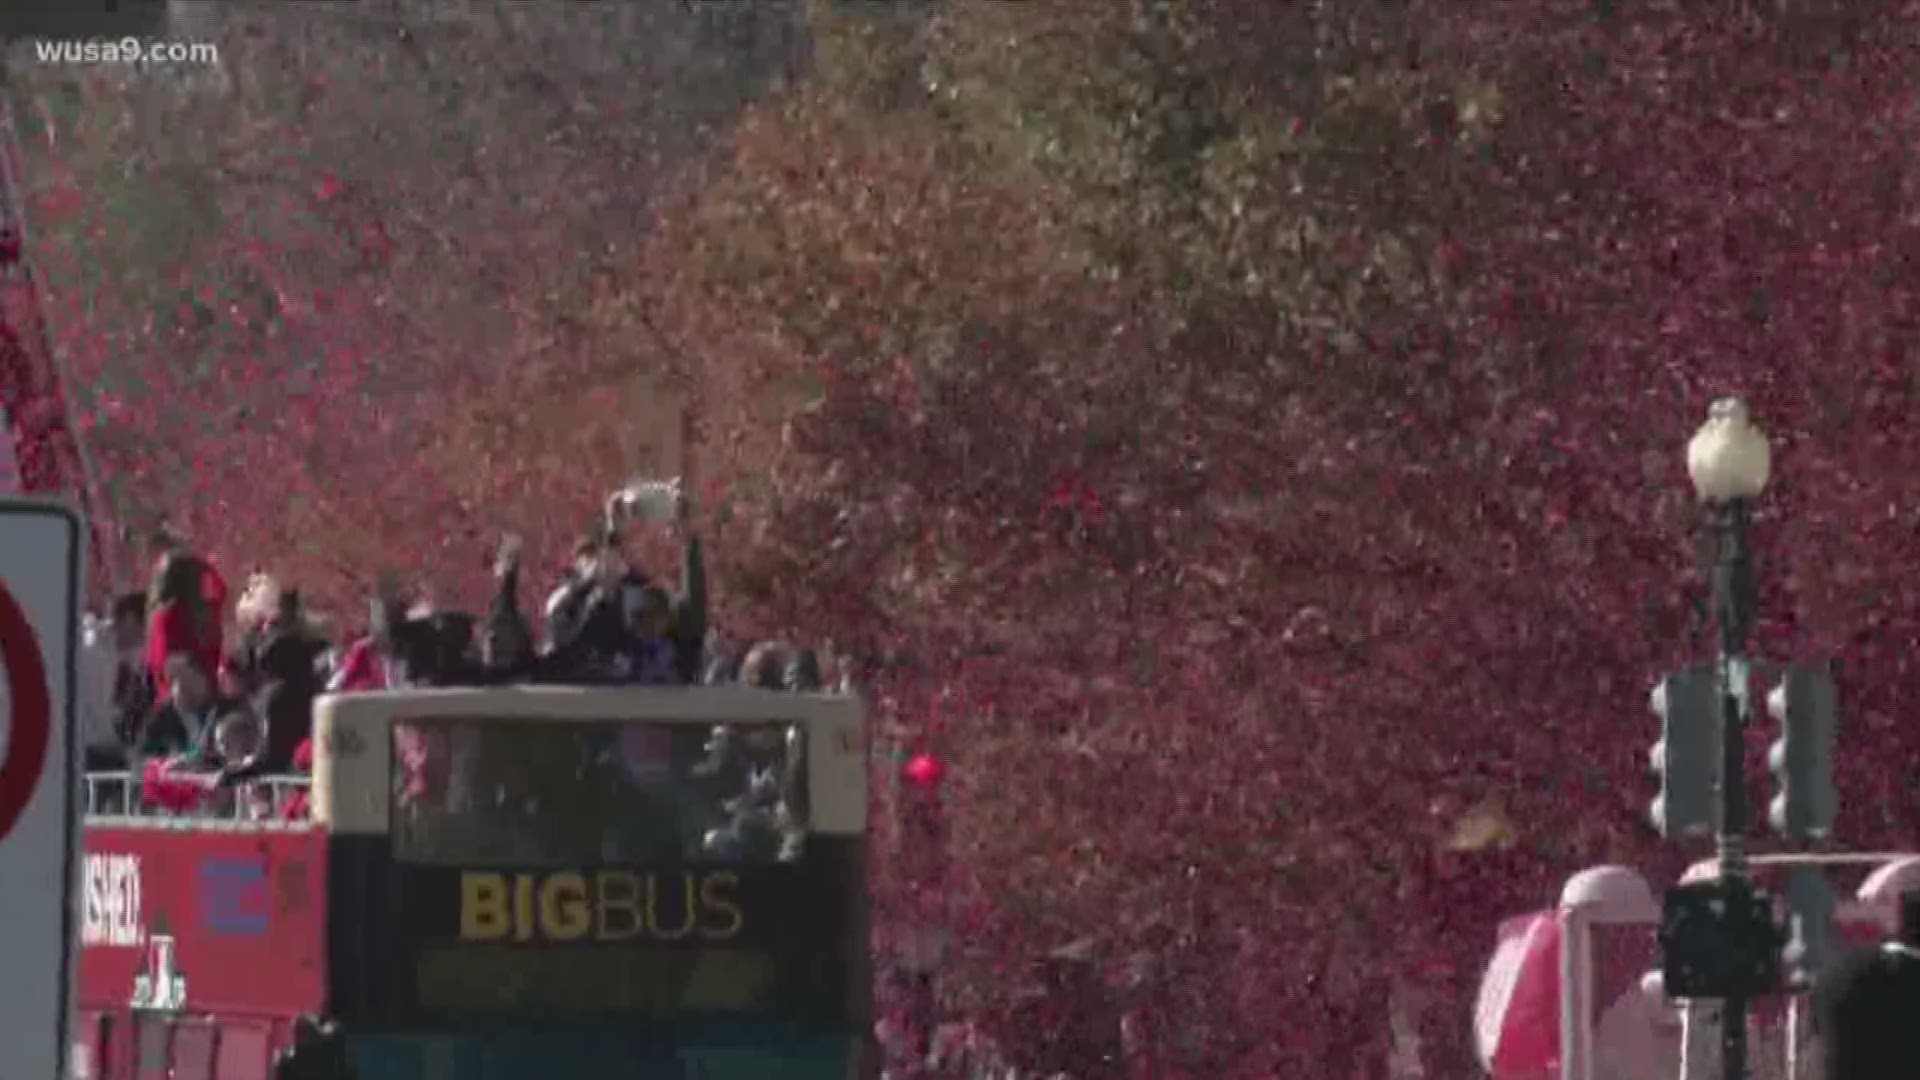 As they hoist the Commissioners Trophy in the air, red confetti fell from the sky.